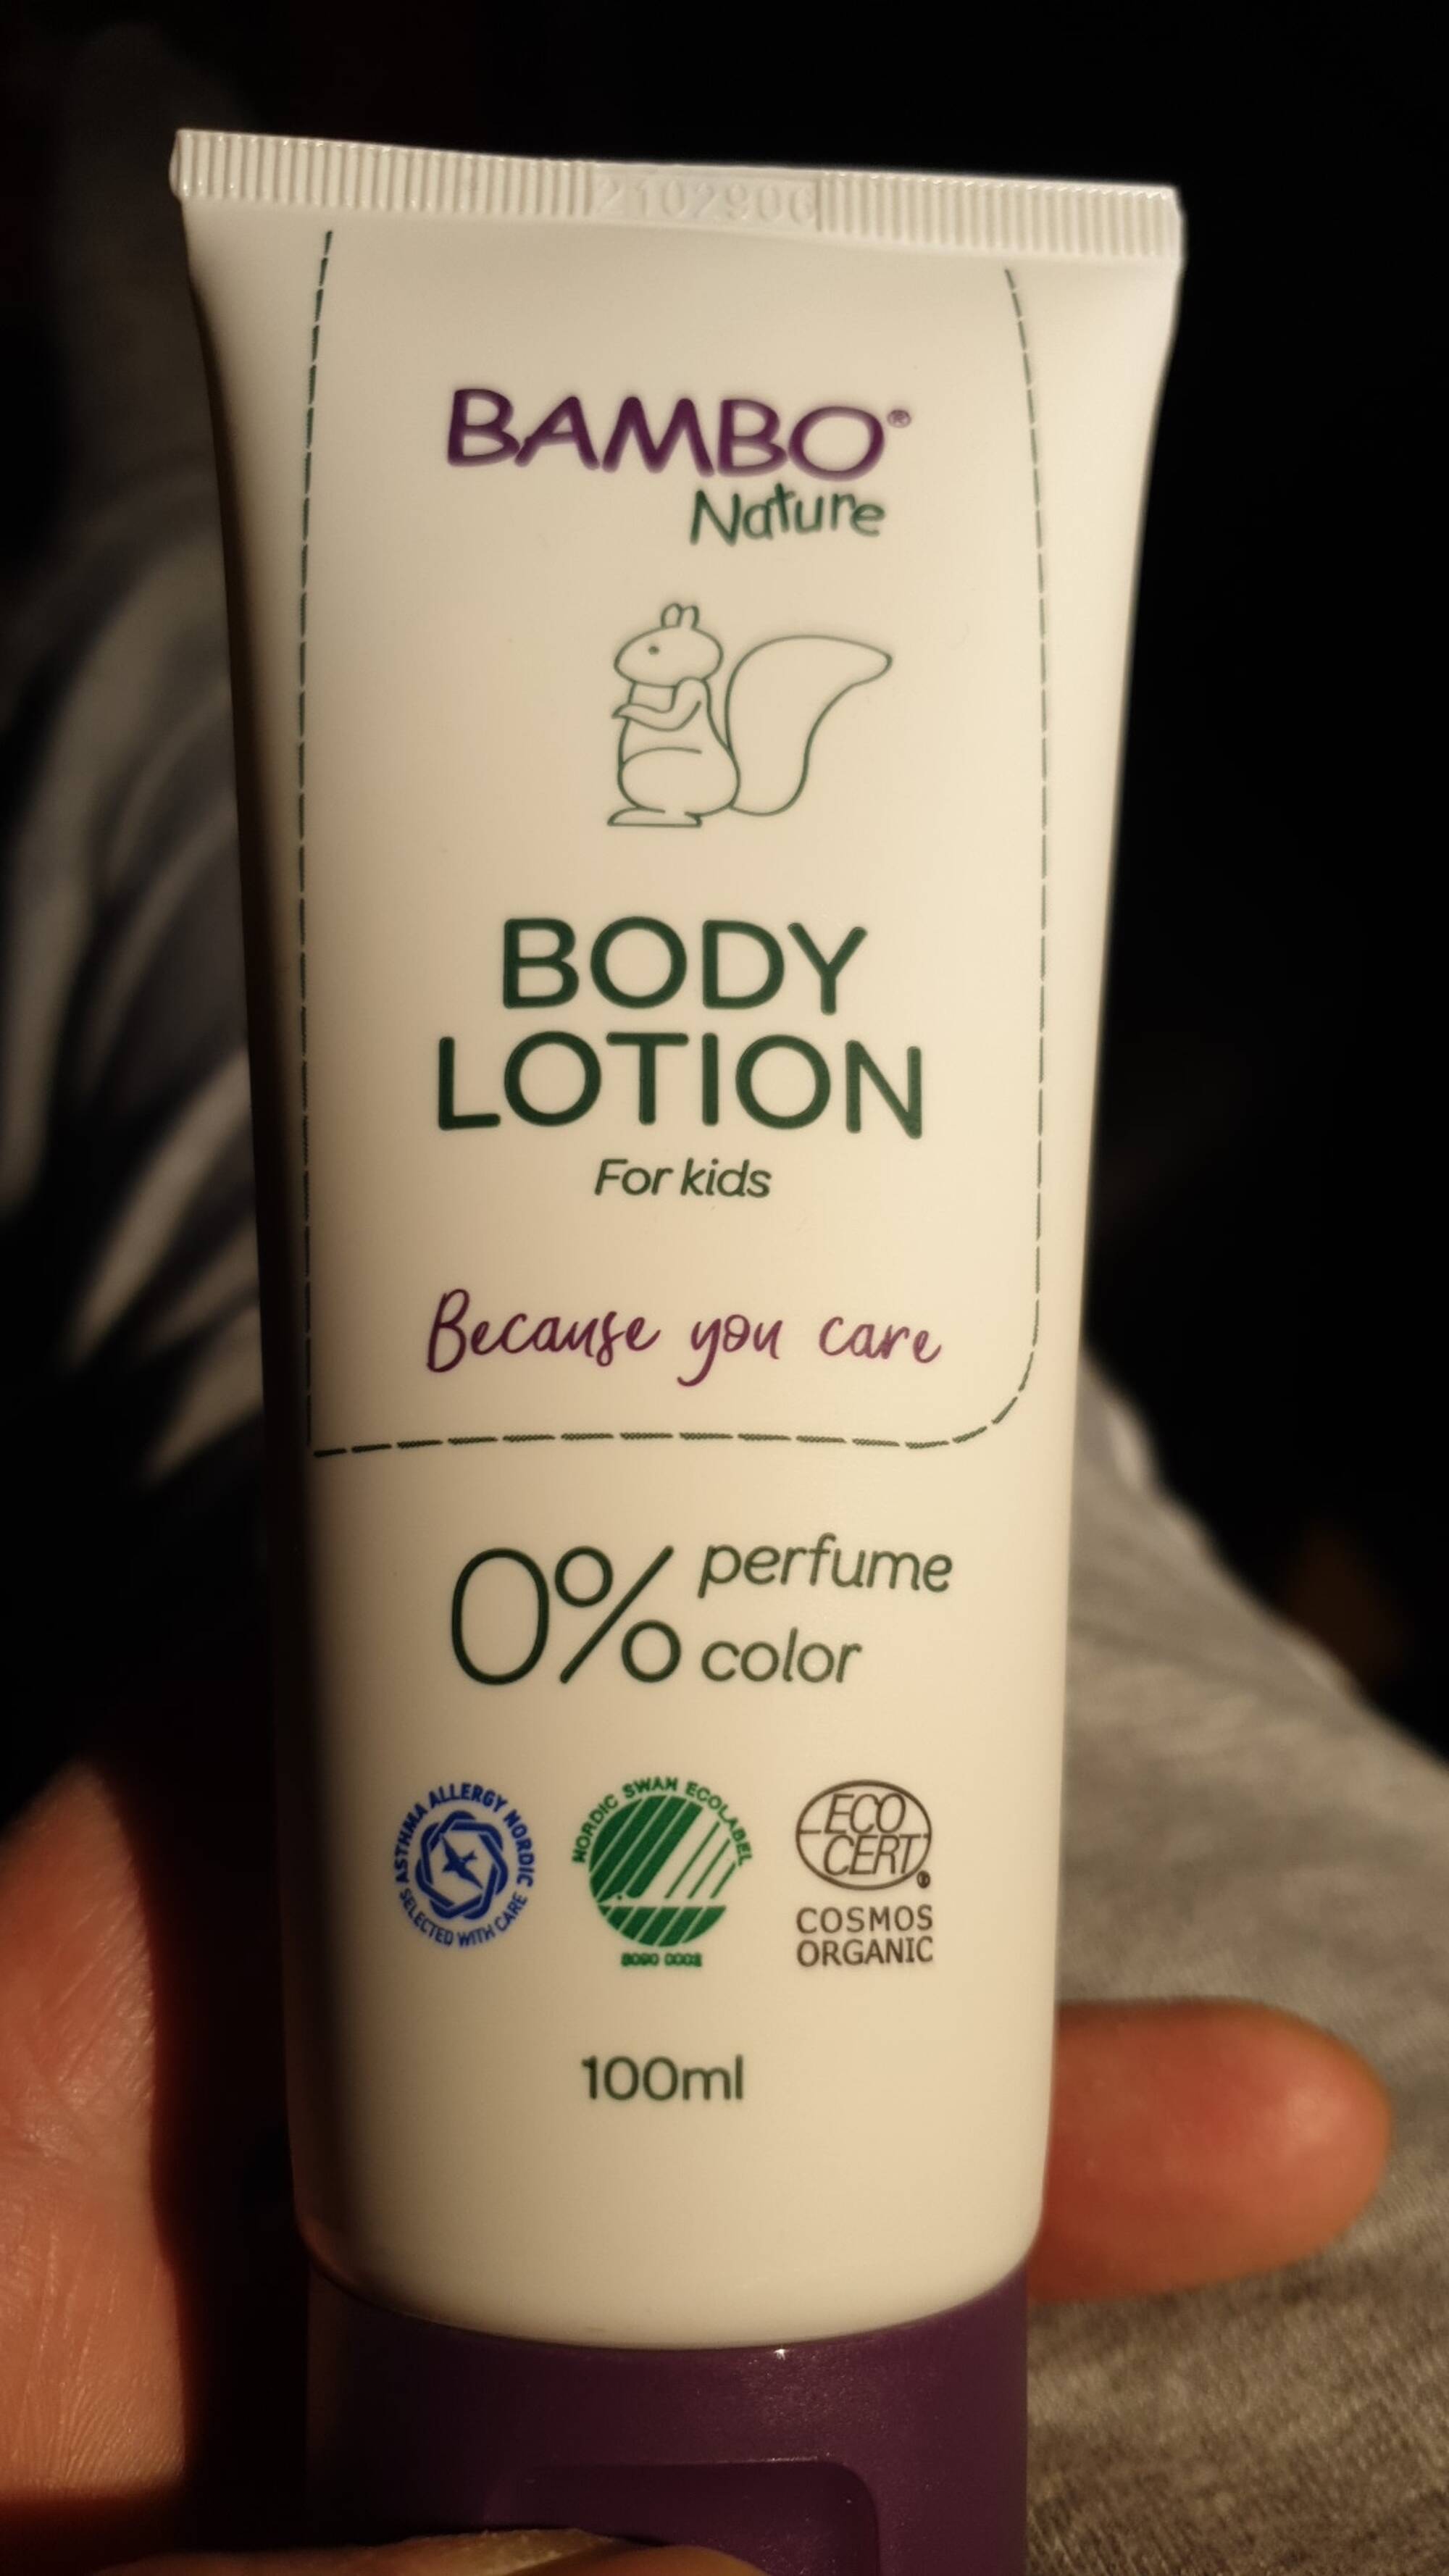 BAMBO NATURE - Body lotion for kids